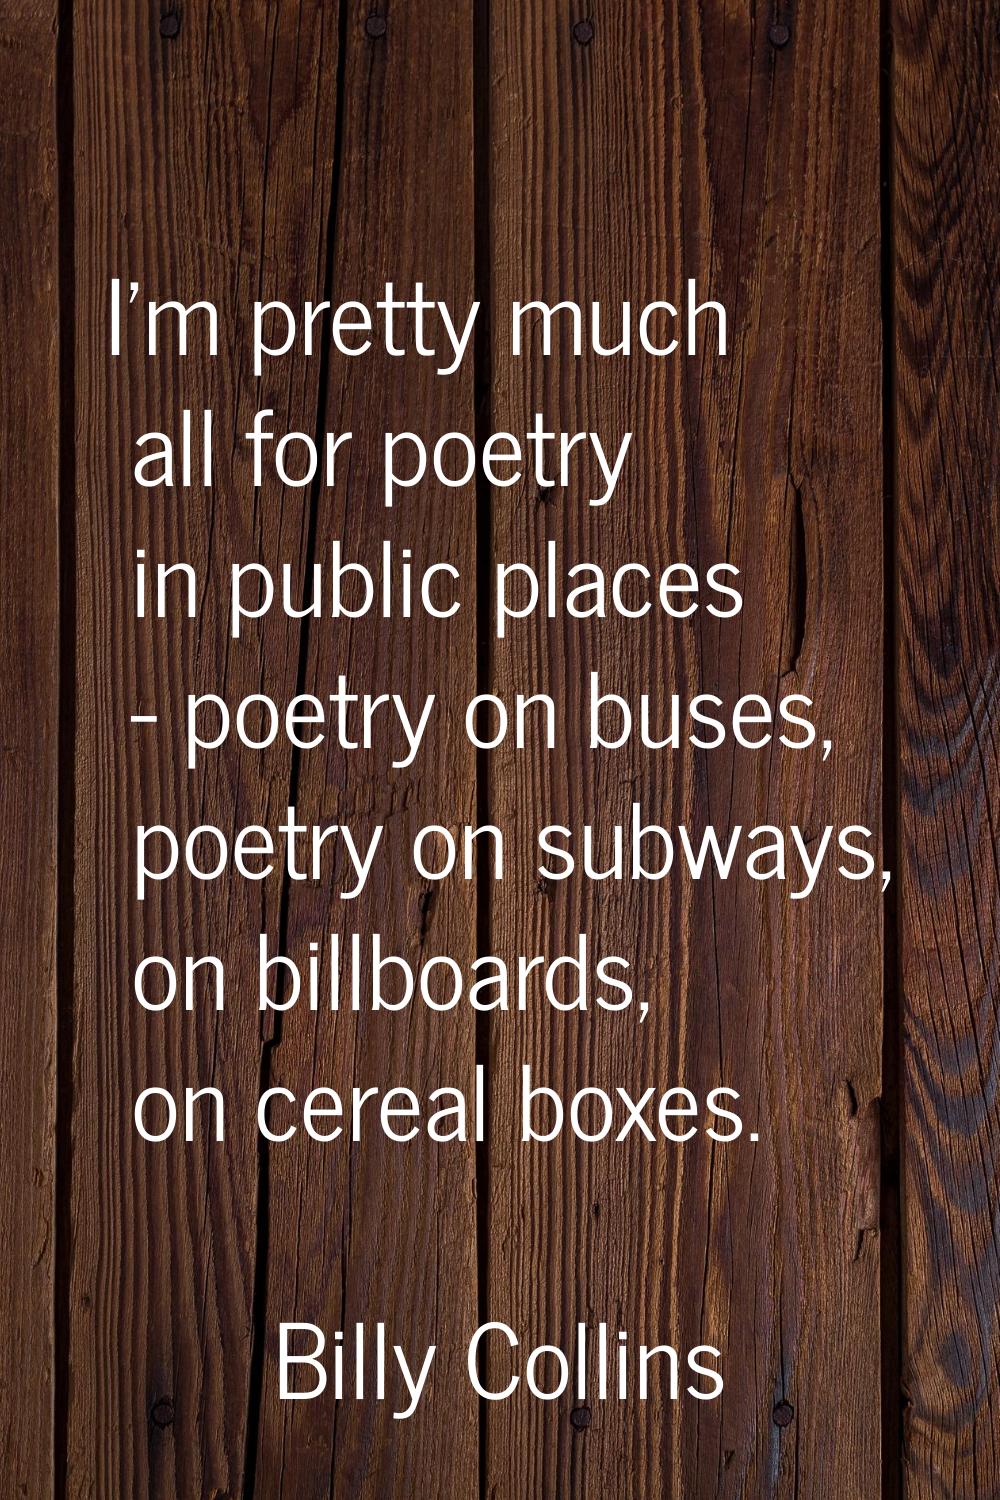 I'm pretty much all for poetry in public places - poetry on buses, poetry on subways, on billboards